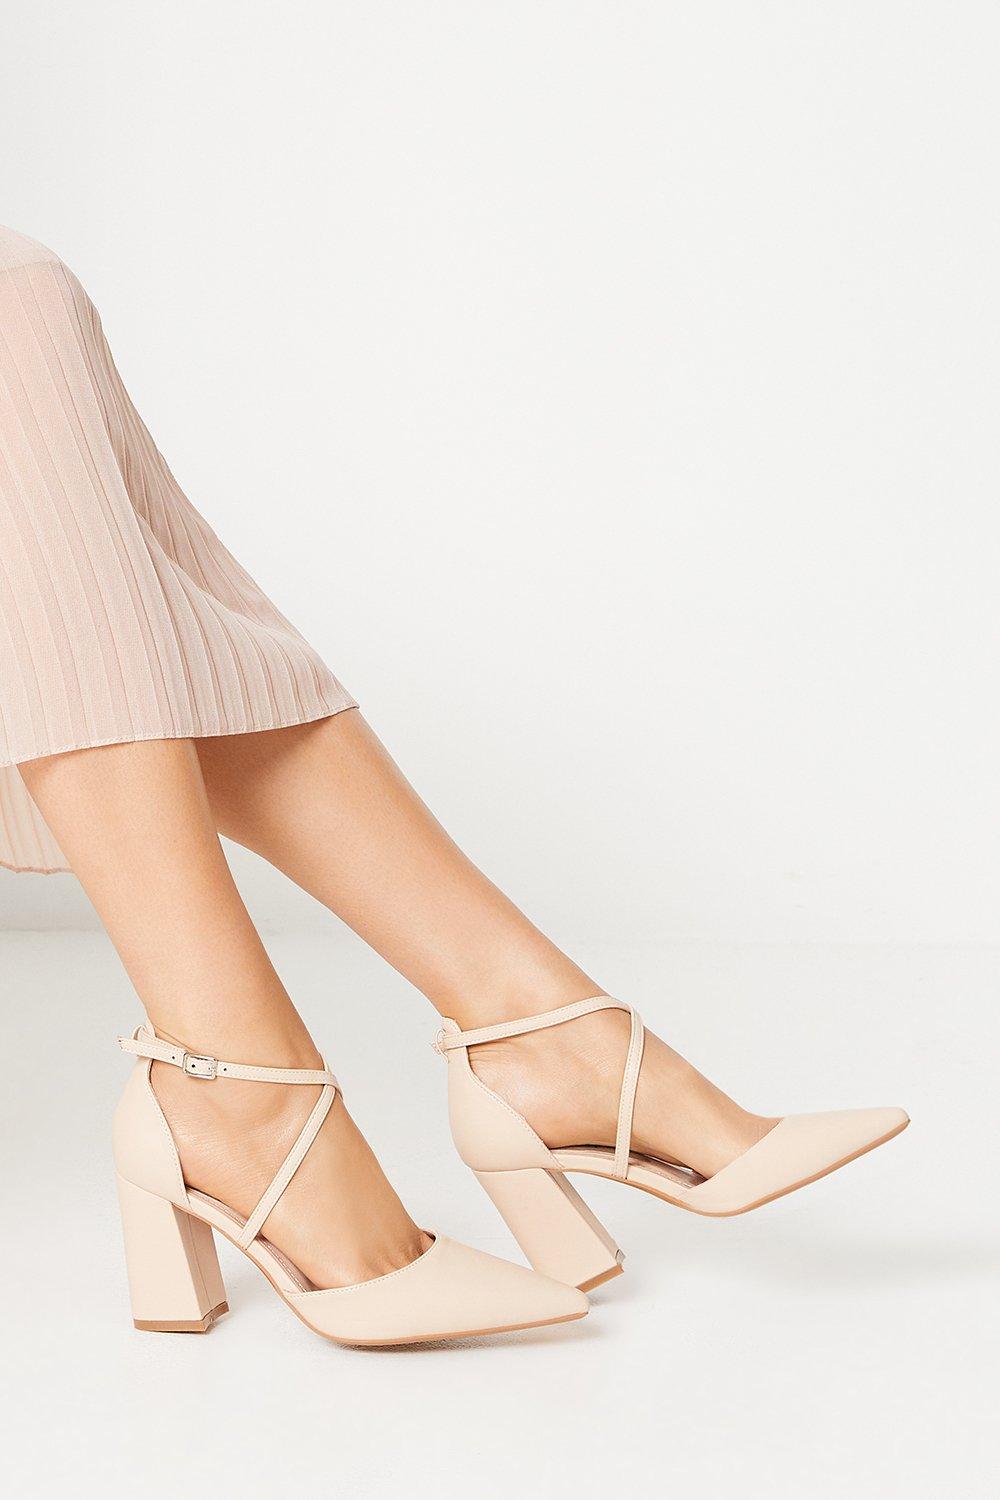 Treat Cross Strap Pointed Block Heel Court Shoes - Nude